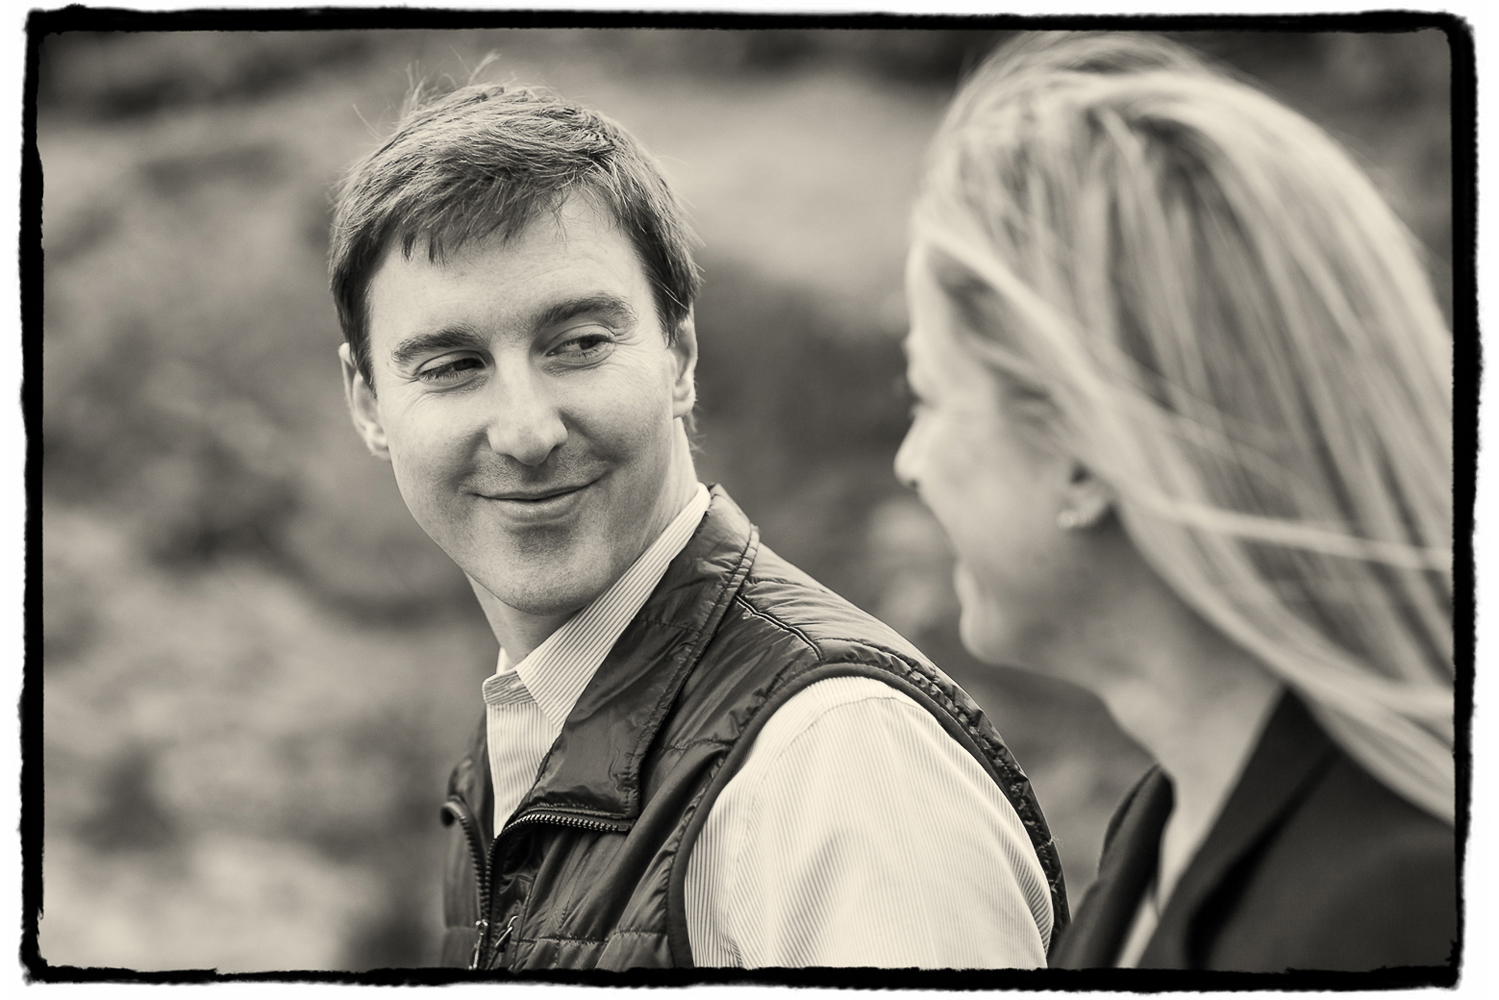 Engagement Portraits: Tim gives Noelle a loving look as they walk through Central Park.